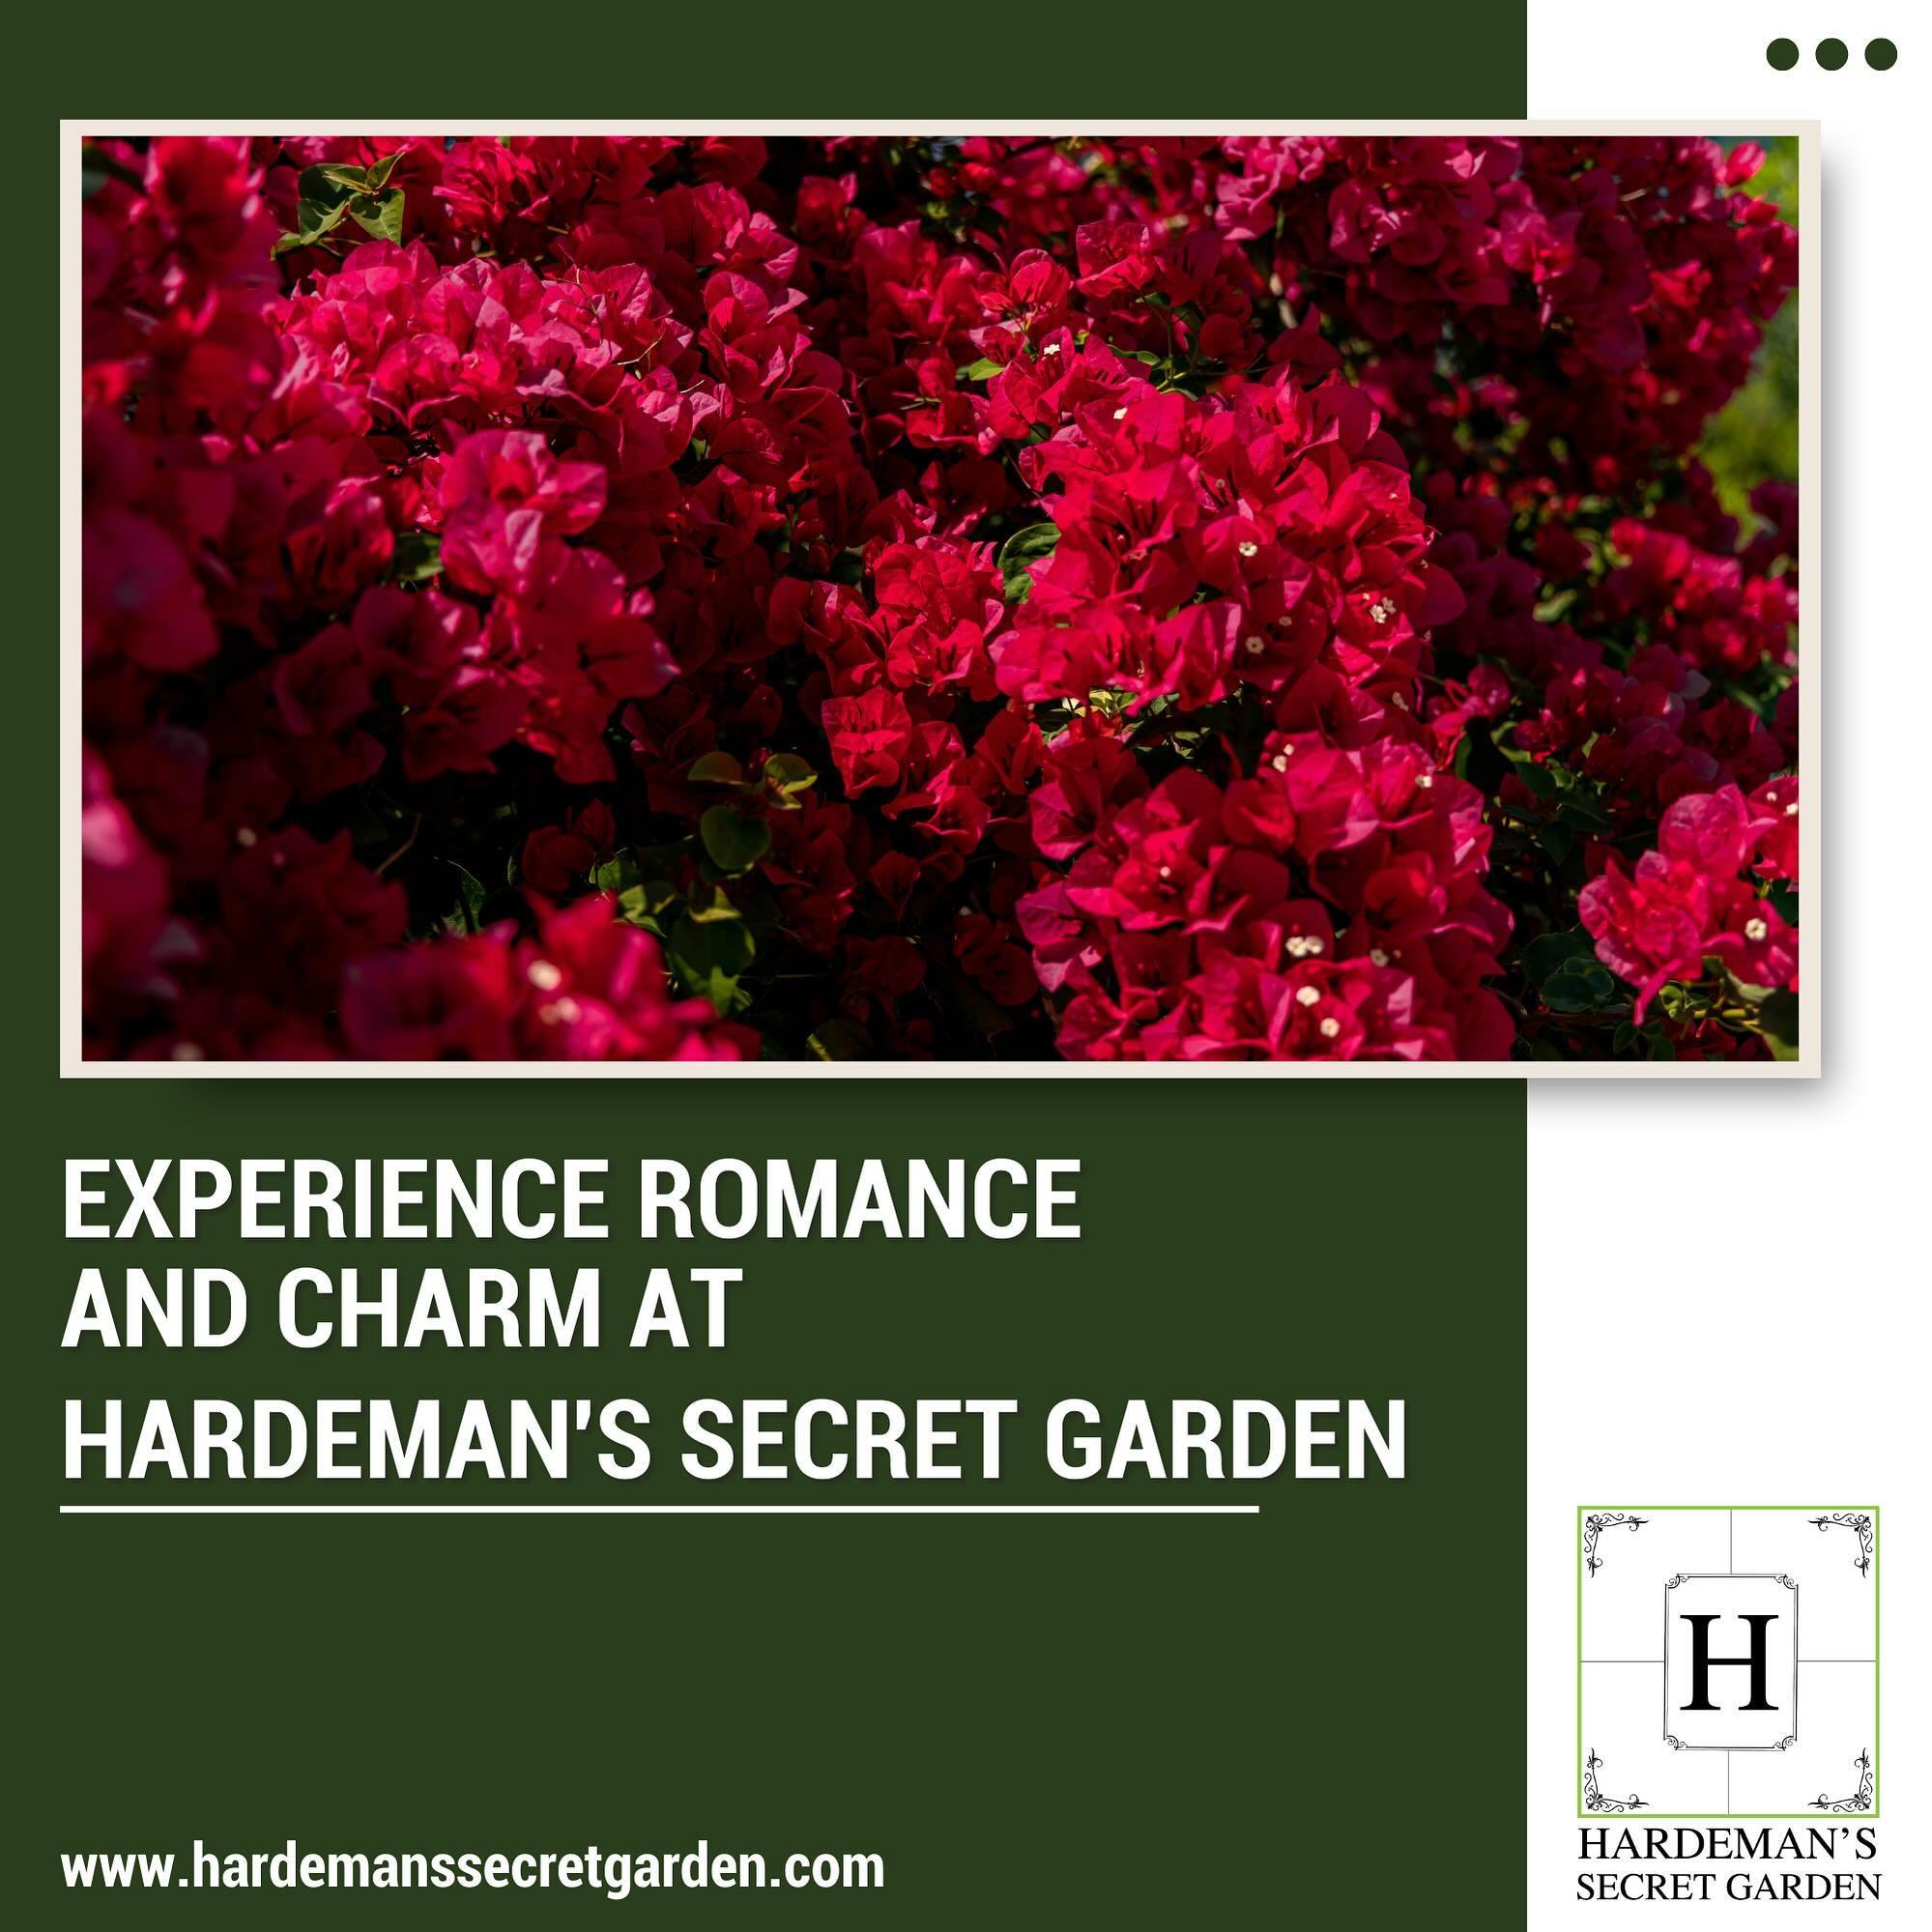 Experience romance and charm at Hardeman&rsquo;s Secret Garden, surrounded by lush greenery and delicate blossoms, creating the perfect backdrop for your celebration of love.

https://www.hardemanssecretgarden.com/
#hardemanssecretgarden #weddings #w